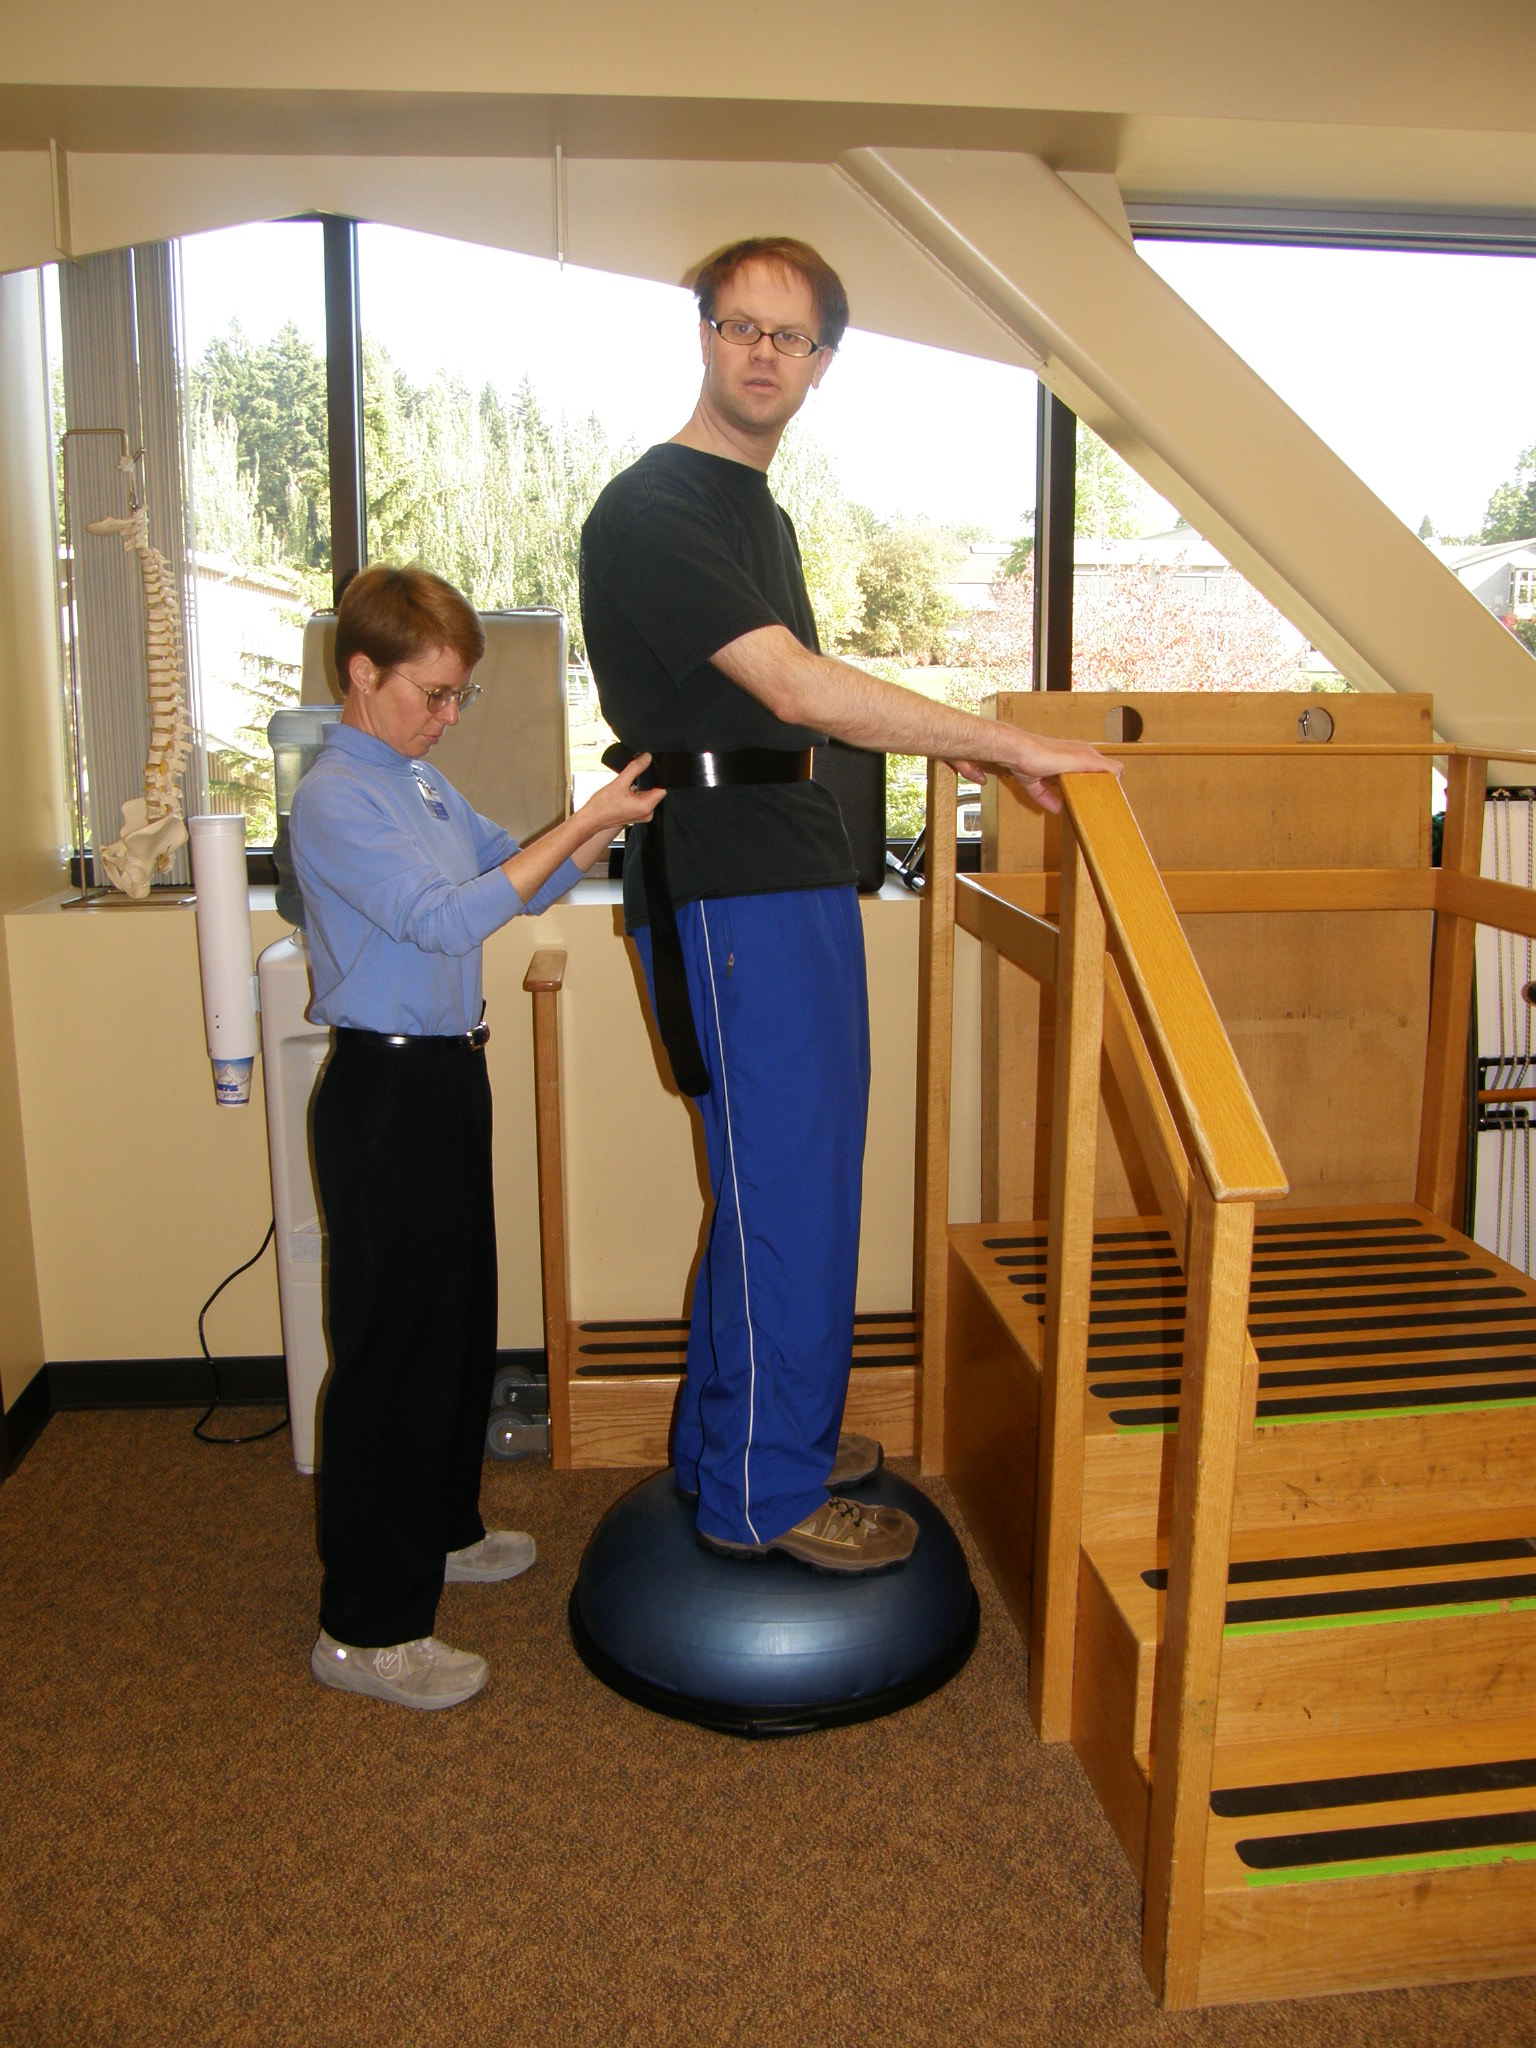 Manual Therapy in Physical Therapy